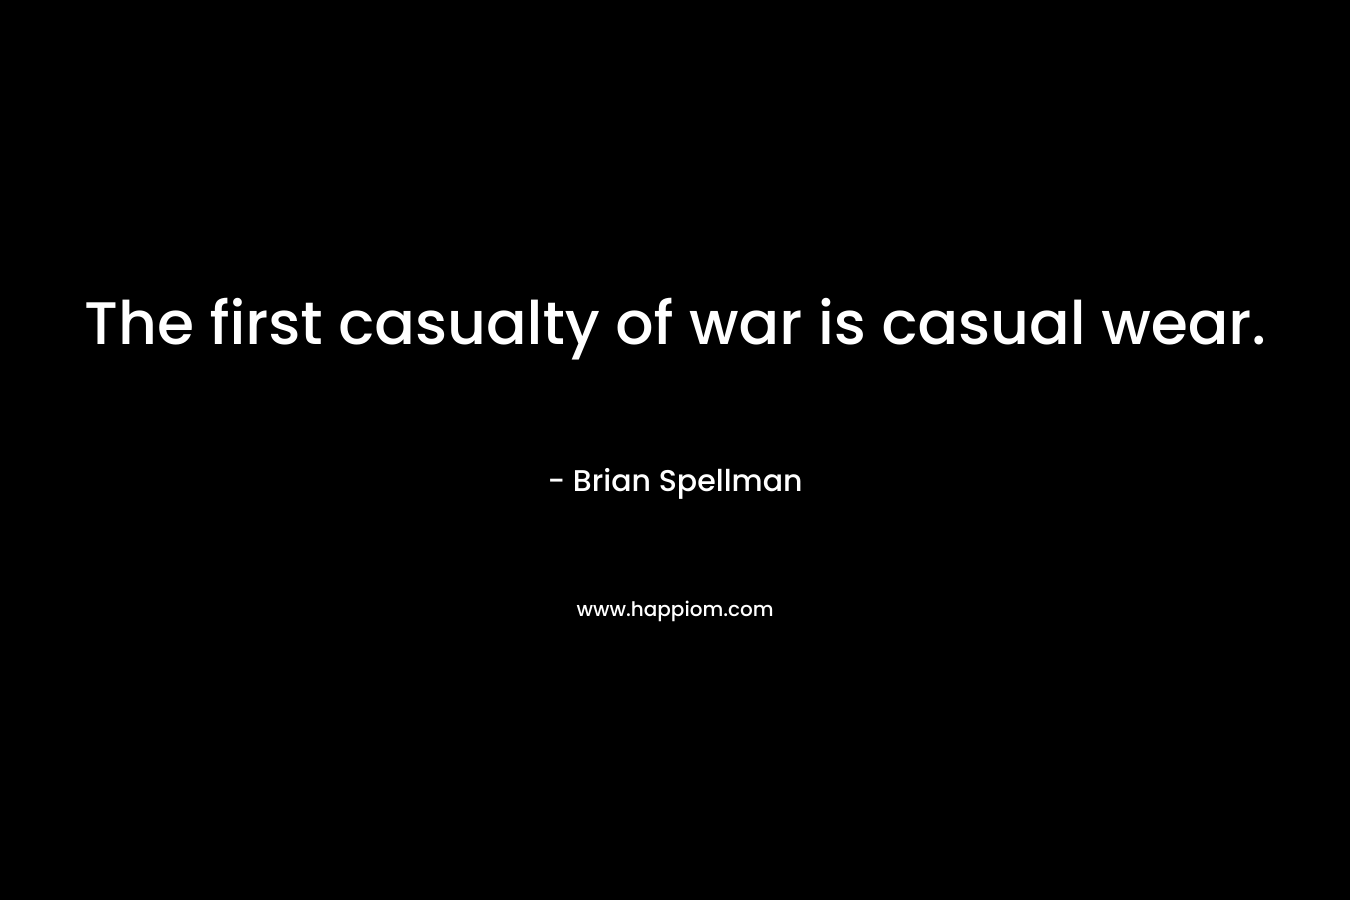 The first casualty of war is casual wear.